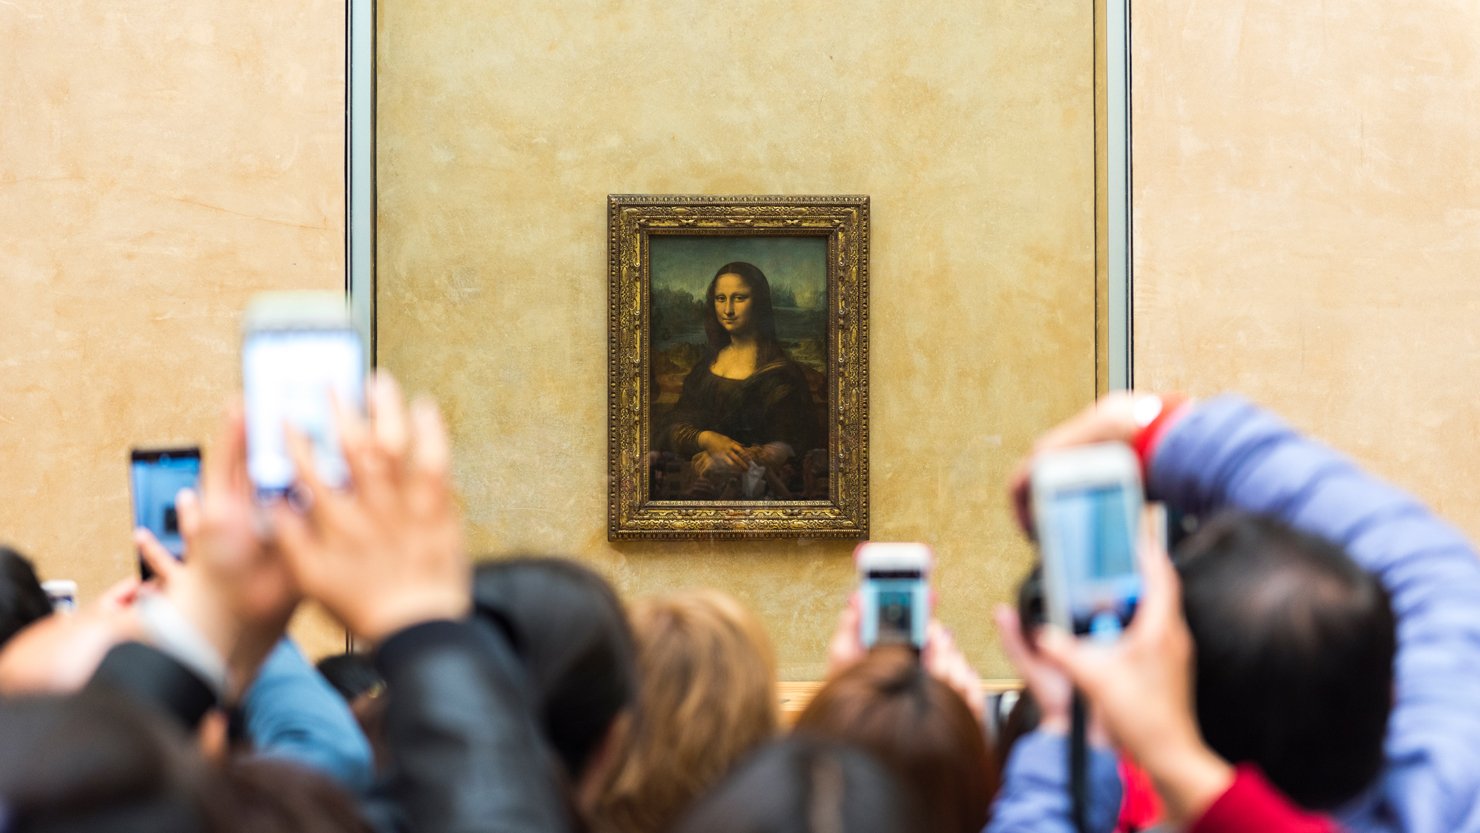 The Mona Lisa being photographed by visitors at the Louvre in 2017